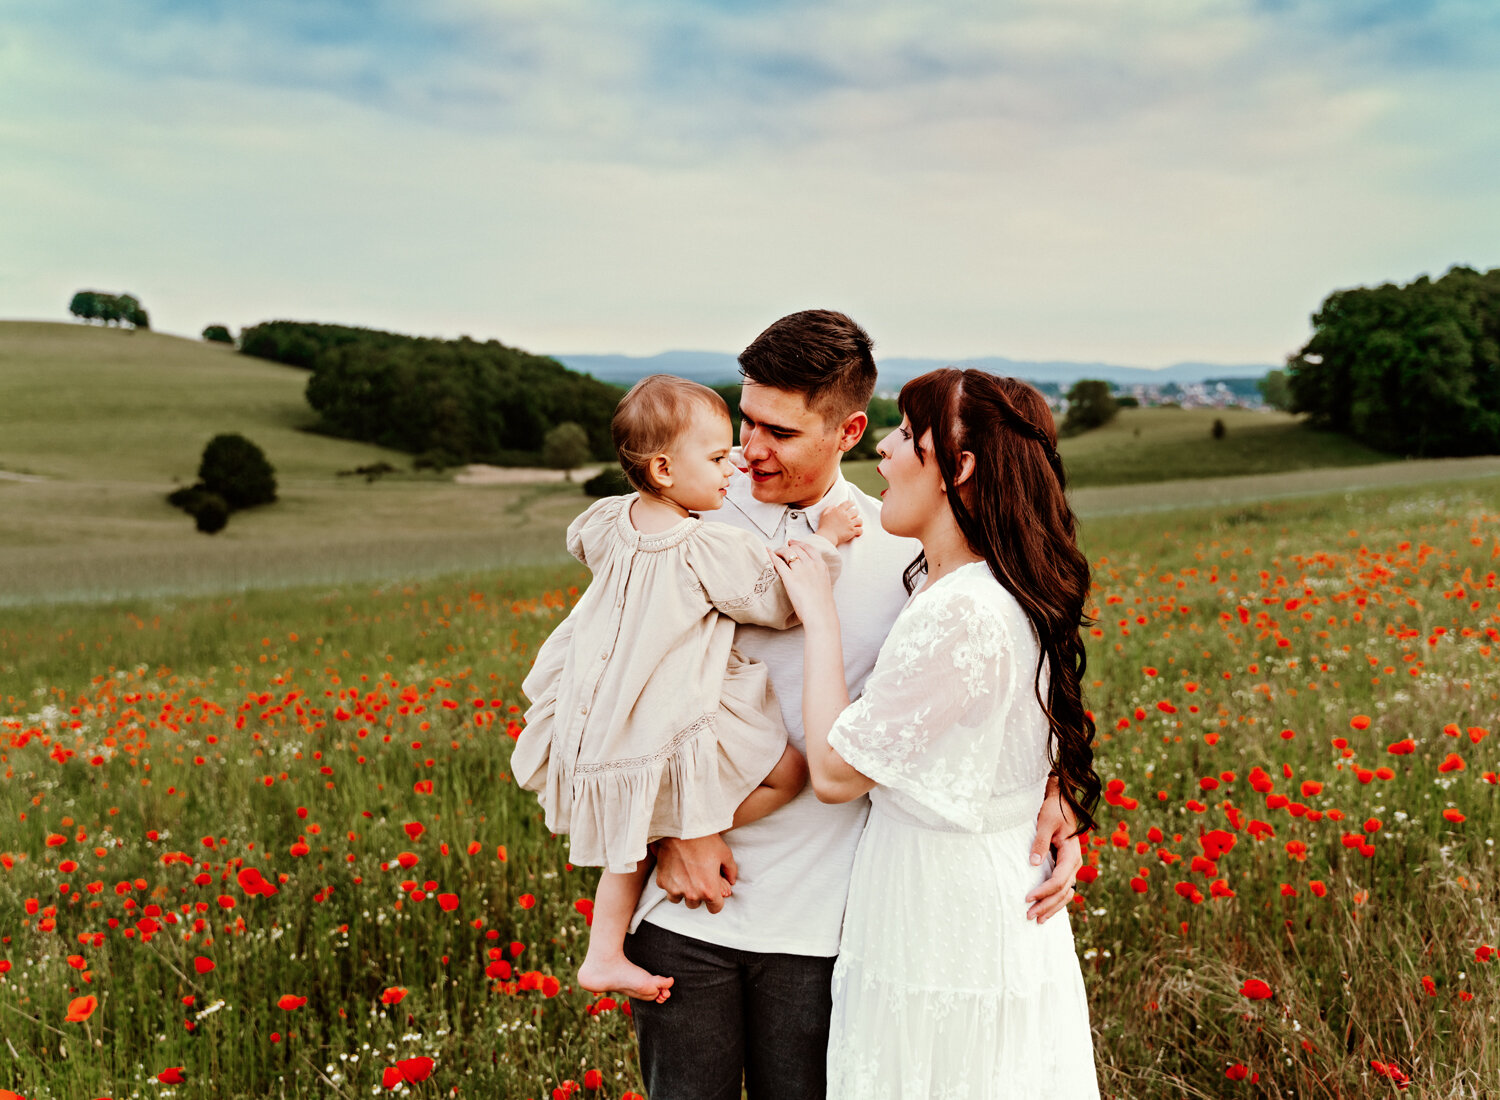 young-family-with-baby-girl-palying-in-poppy-flower-field-in-ramstein-family-photographer-sarah-havens-kaiserslautern-germany (1).jpg